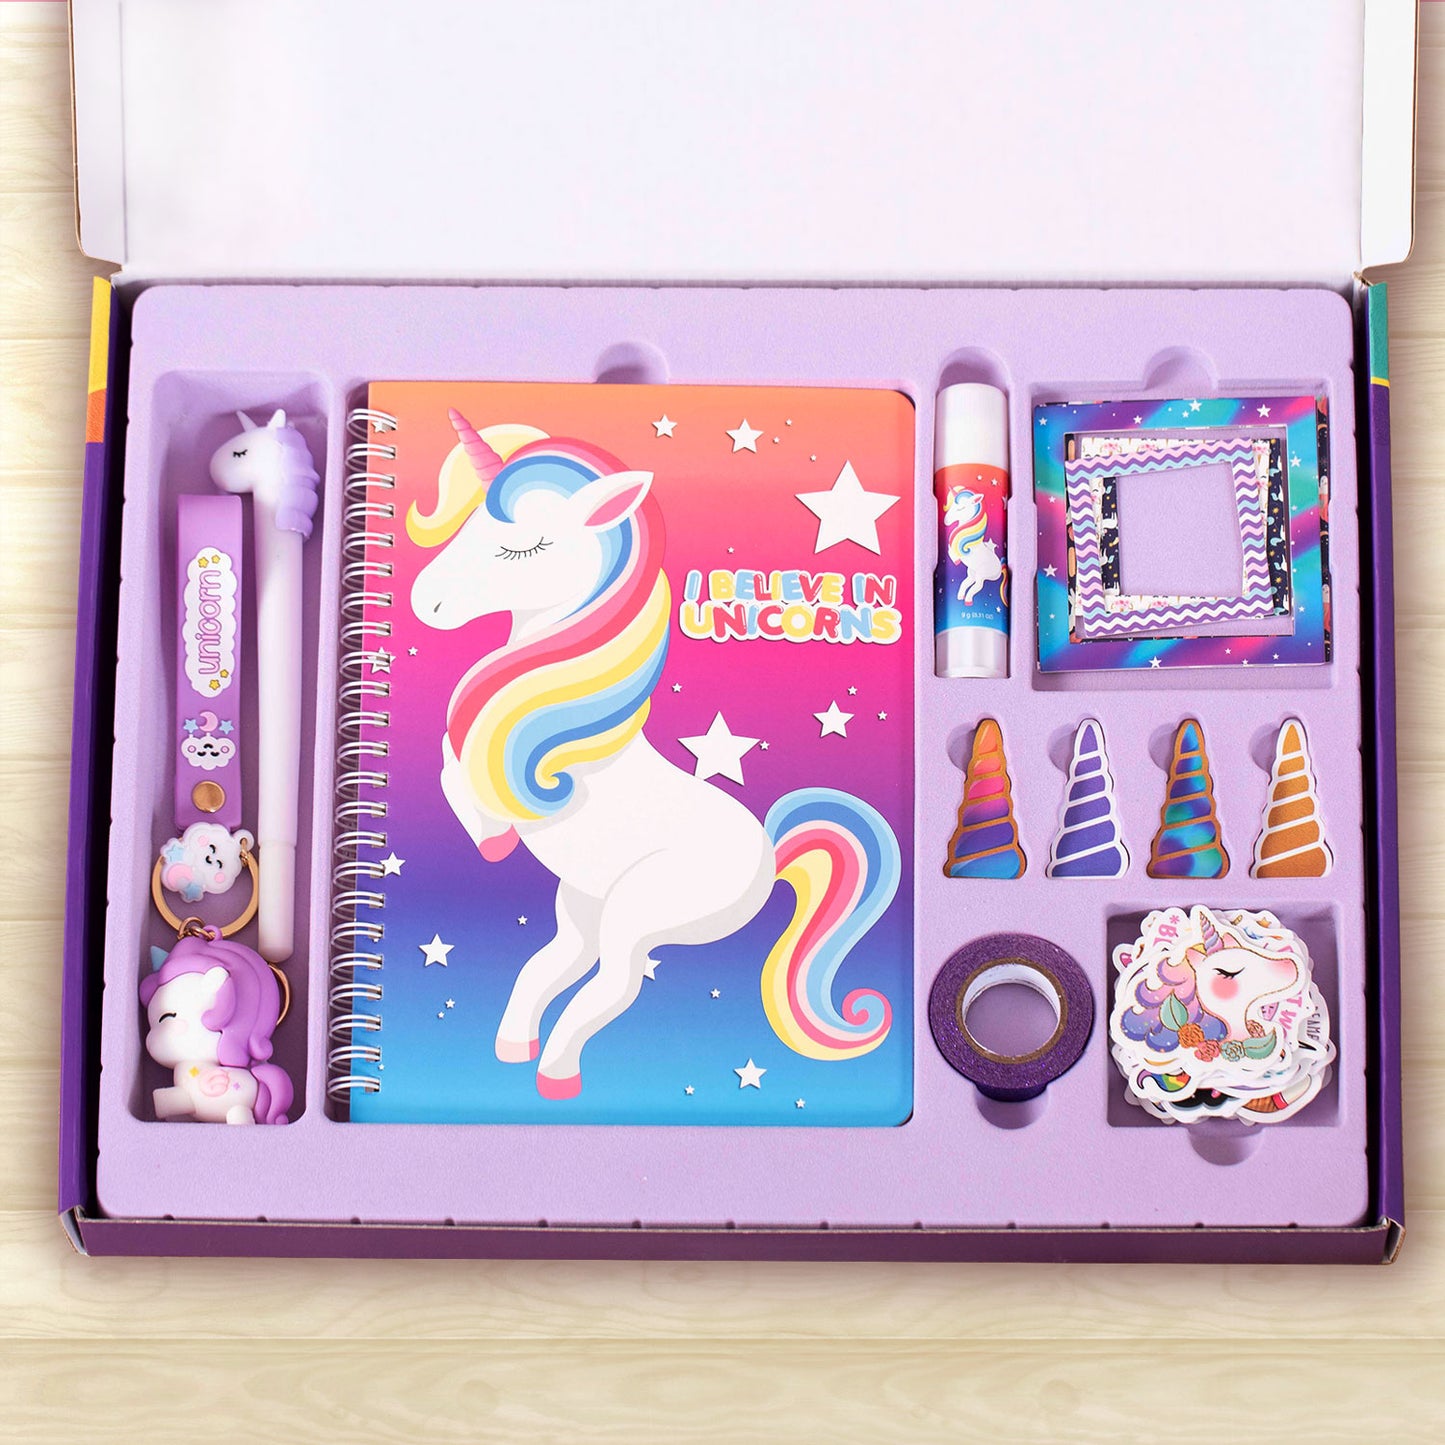 ANERZA DIY Unicorn Journal Set for Girls Gifts Ages 6 7 8 9 10 11 12 13 Years Old and Up, Birthday/Christmas Gifts Ideas, Toys for Teen Girls, Arts and Crafts for Kids 8-12, Scrapbook Stickers kit